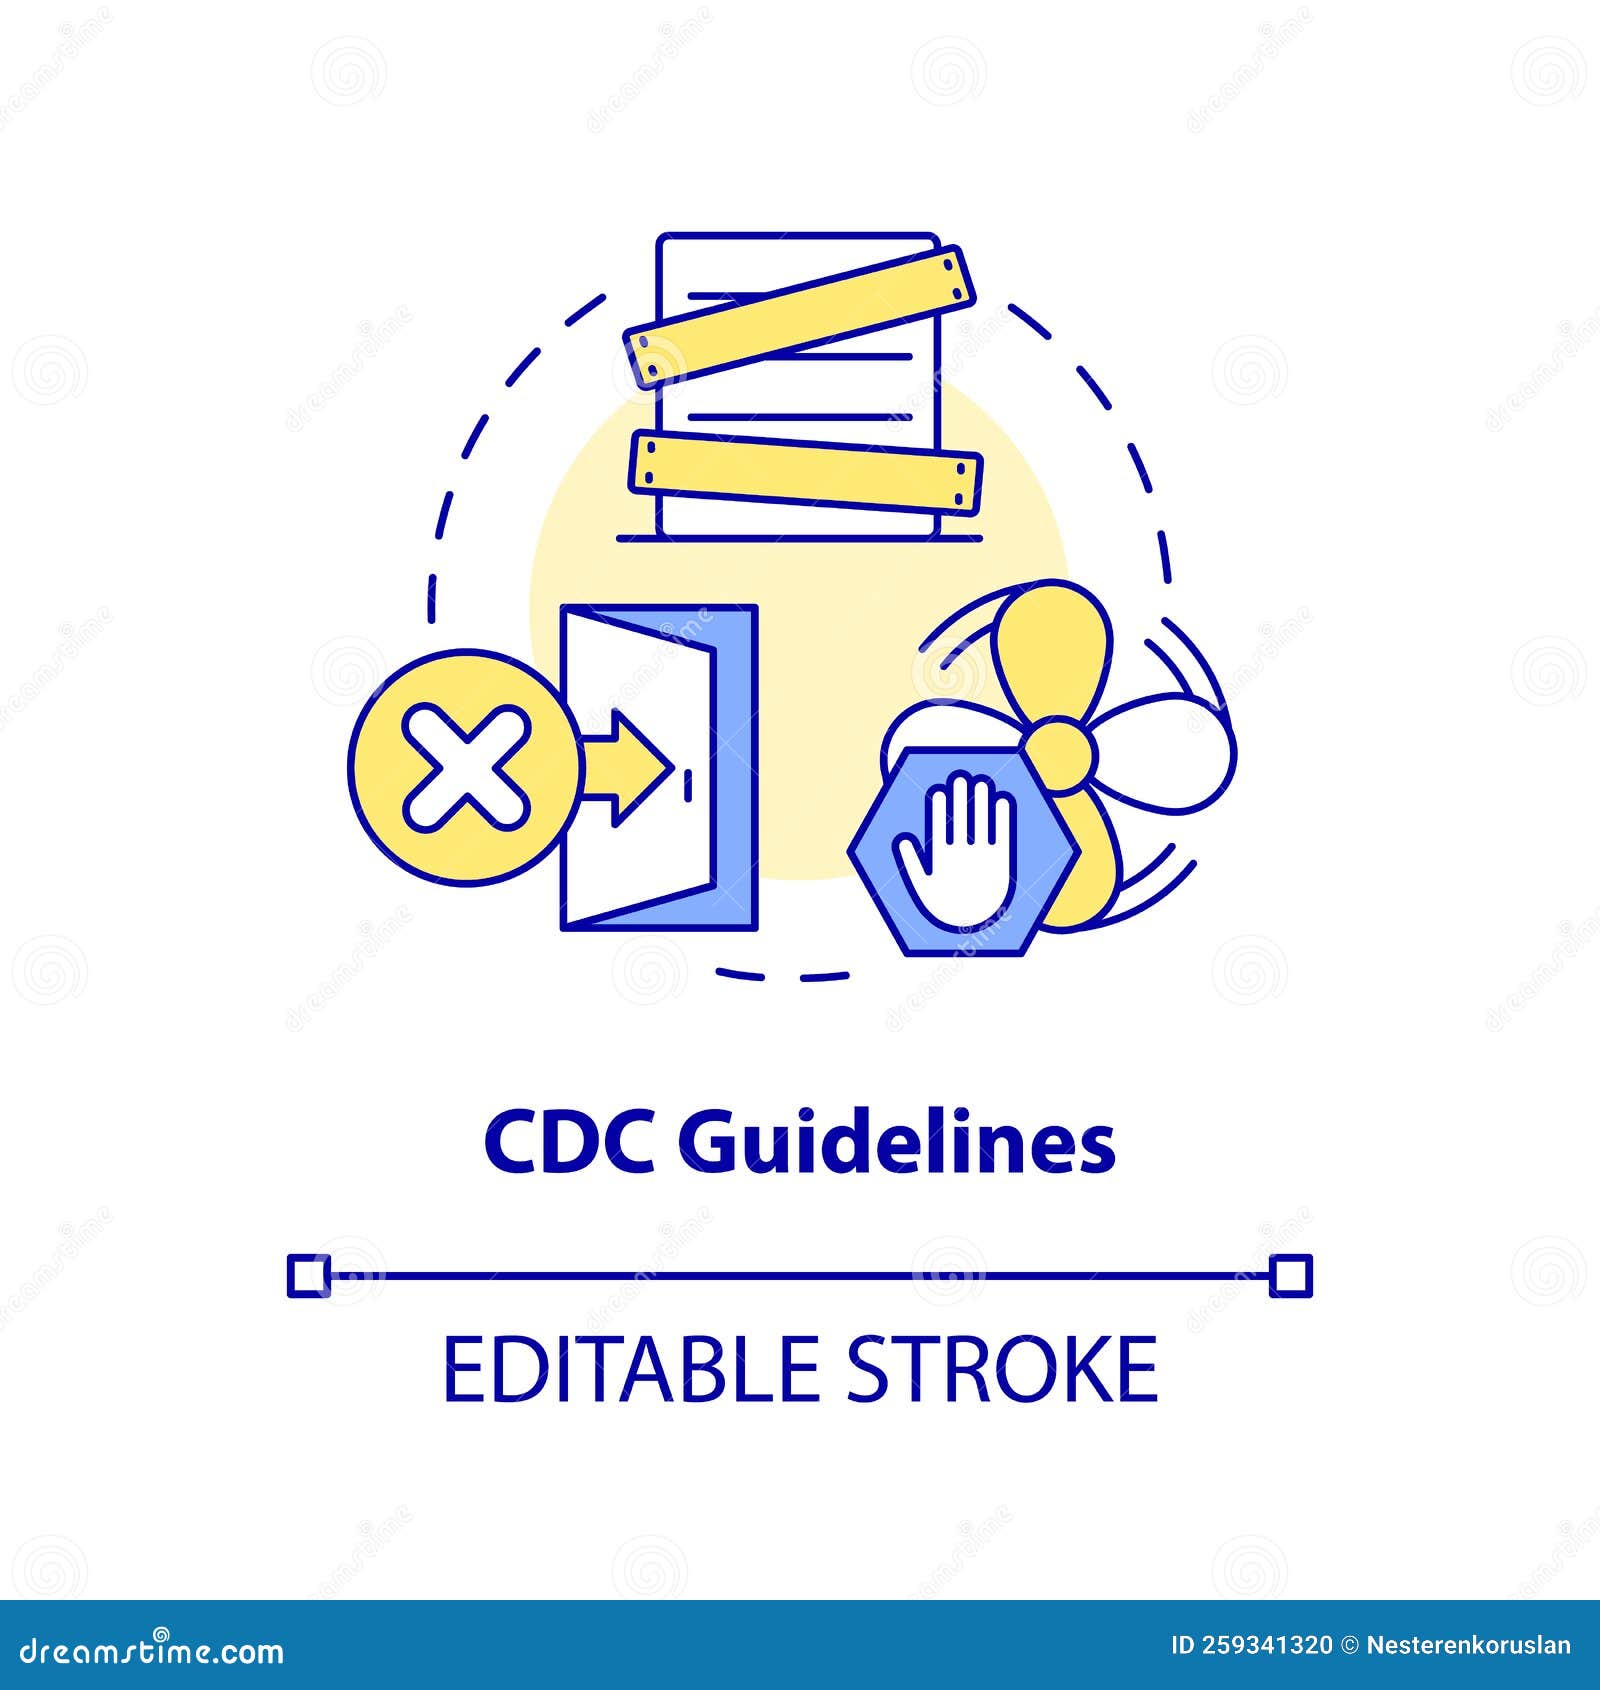 cdc guidelines concept icon